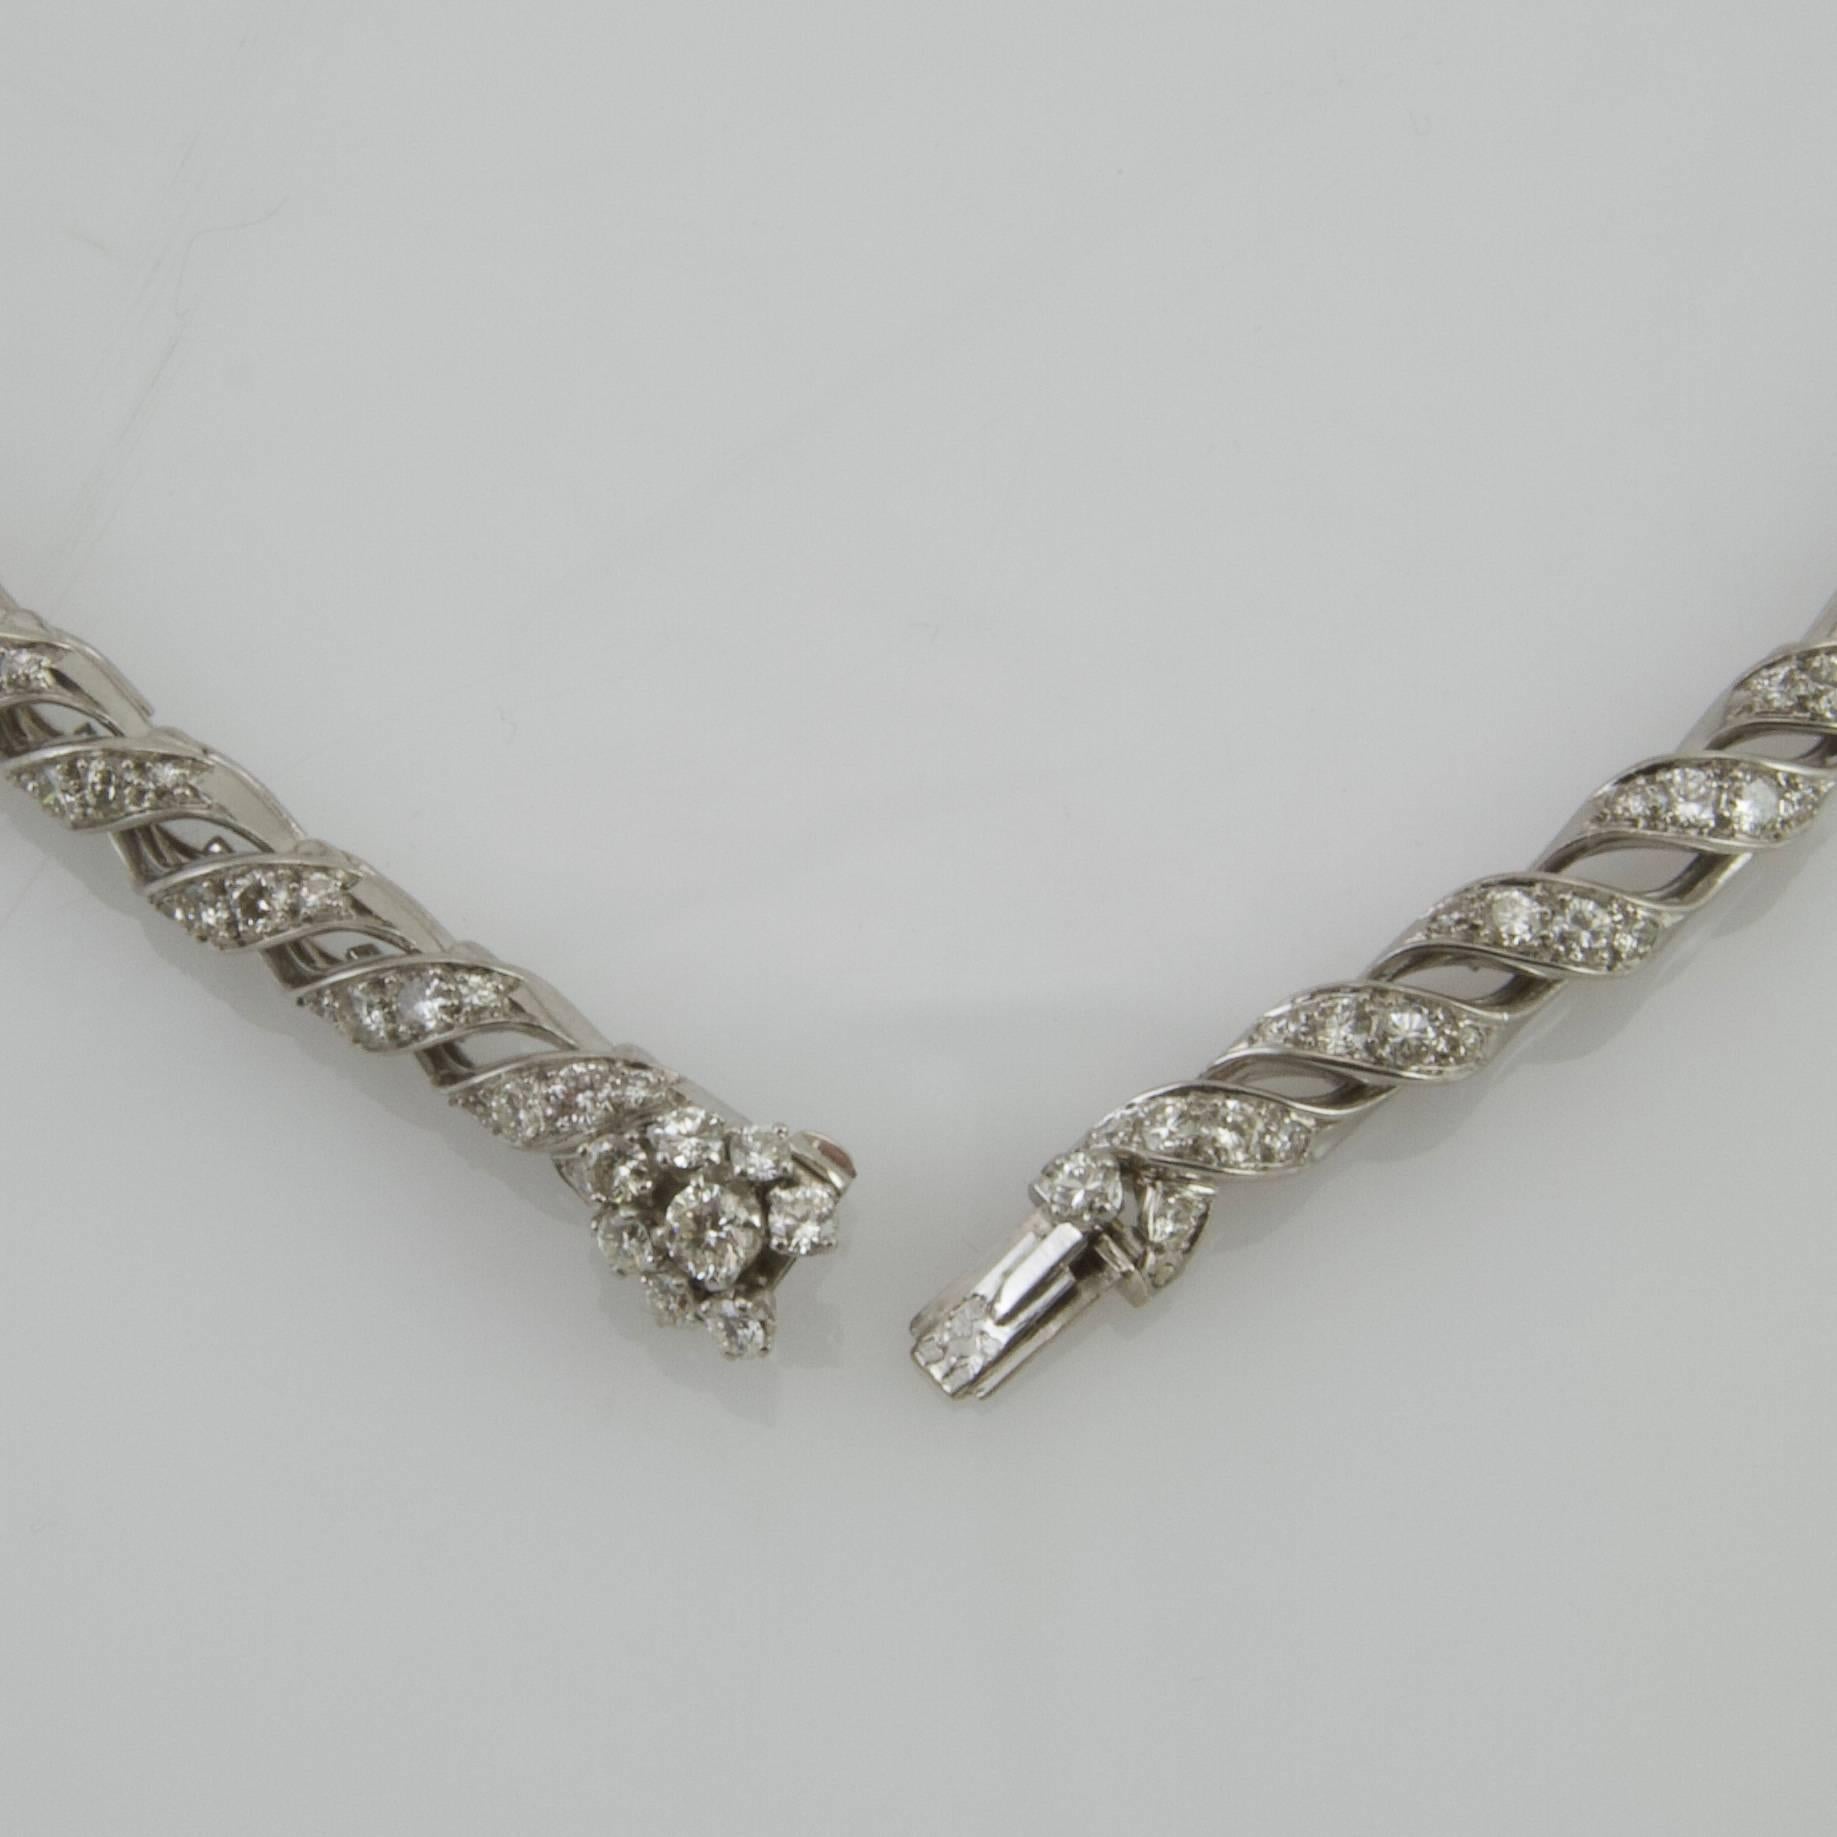 Vintage 1950 Platinum and Gold Diamond Necklace Made in France For Sale 2